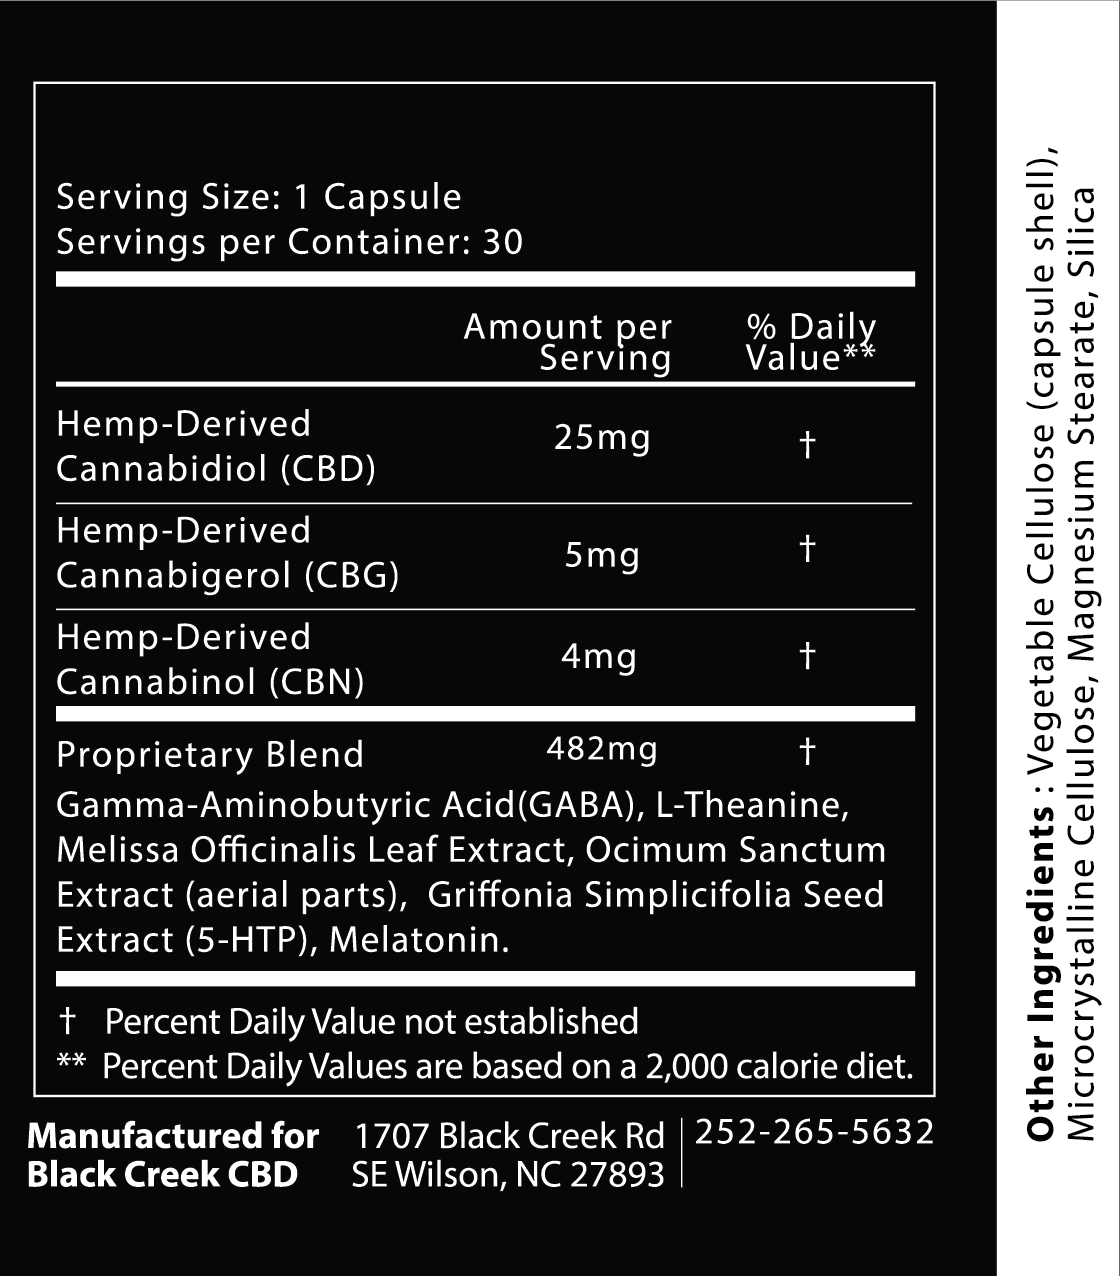 The Supplement Facts Panel for the Black Creek CBD Sleep Capsules. Contains CBD, CBG, CBN, a proprietary blend of gamma-aminobutyric acid, l-theanine, melissa officinalis leaf extract, ocimum sanctum extract, griffonia simplicifolia seed extract, melatonin. Other ingredients include: vegetable cellulose, microcrystalline cellulose, magnesium stearate, silica